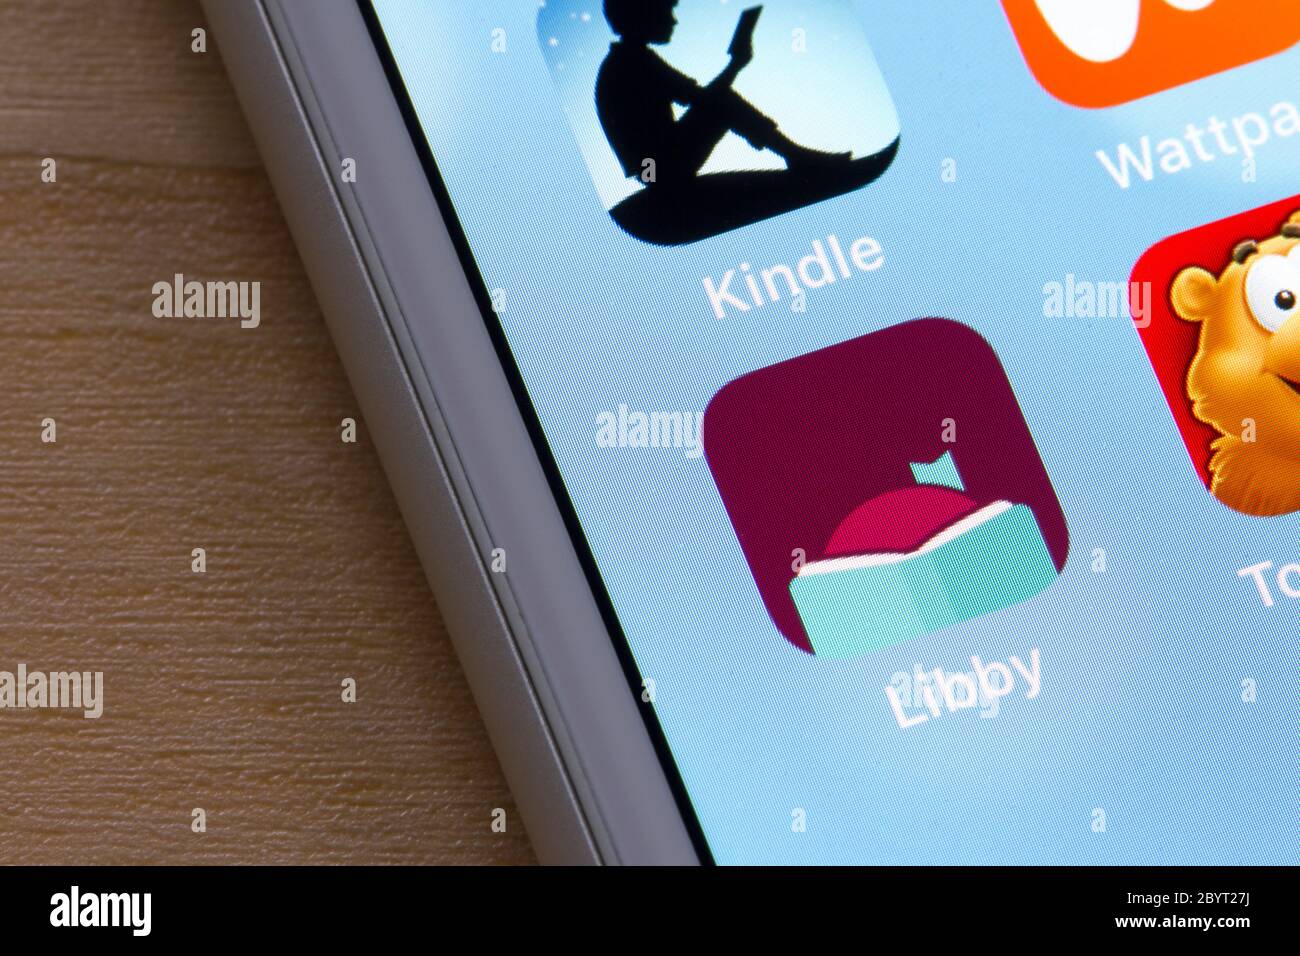 Libby app icon is seen on an iPhone. Libby, built by OverDrive, is a free app where users can borrow ebooks & digital audiobooks from public libraries. Stock Photo